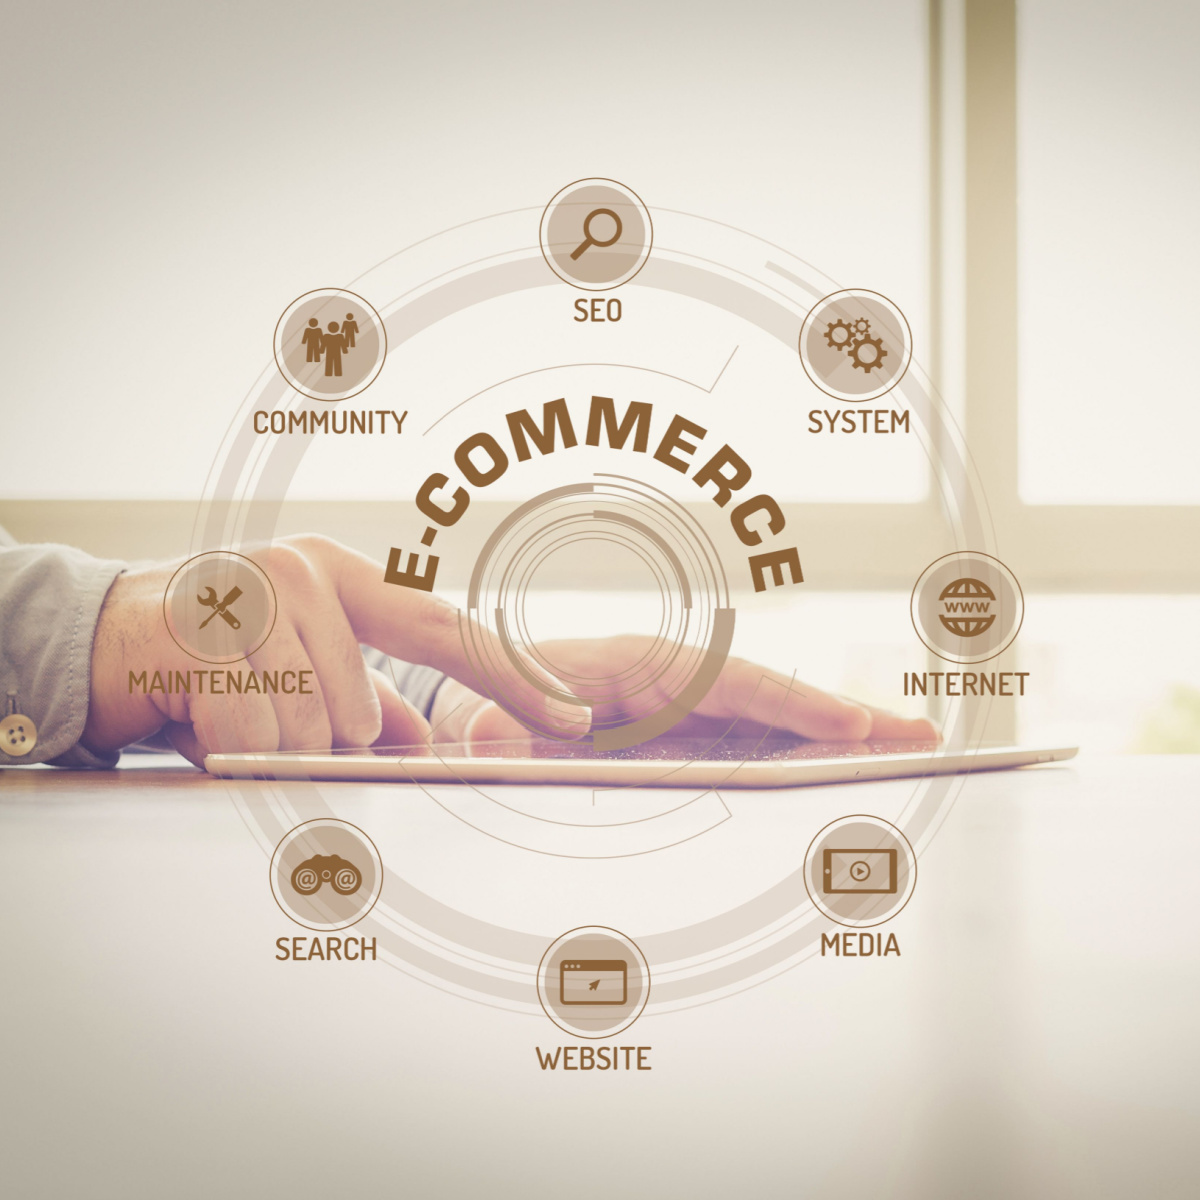 These elements should be present in your E-Commerce Shop Houston website design.